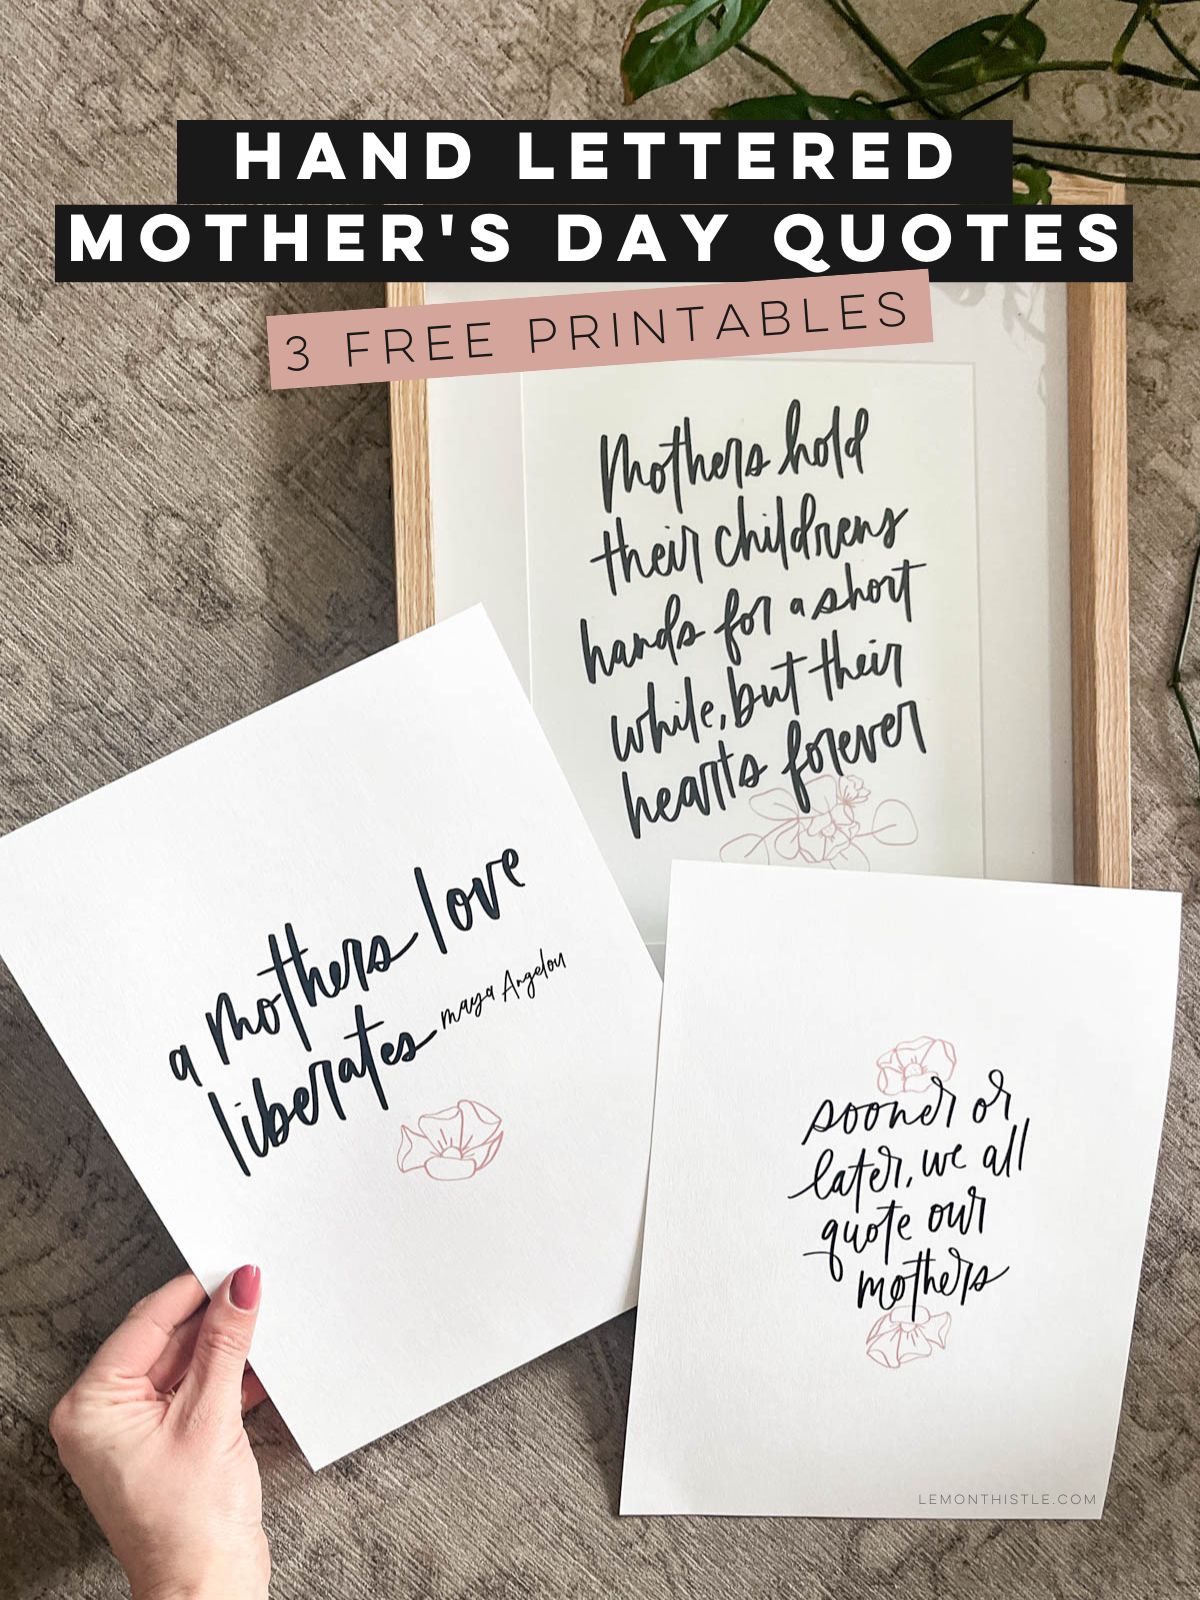 title reads: hand lettered mothers day quotes- three free printables Image of all three printable quotes printed, one framed.